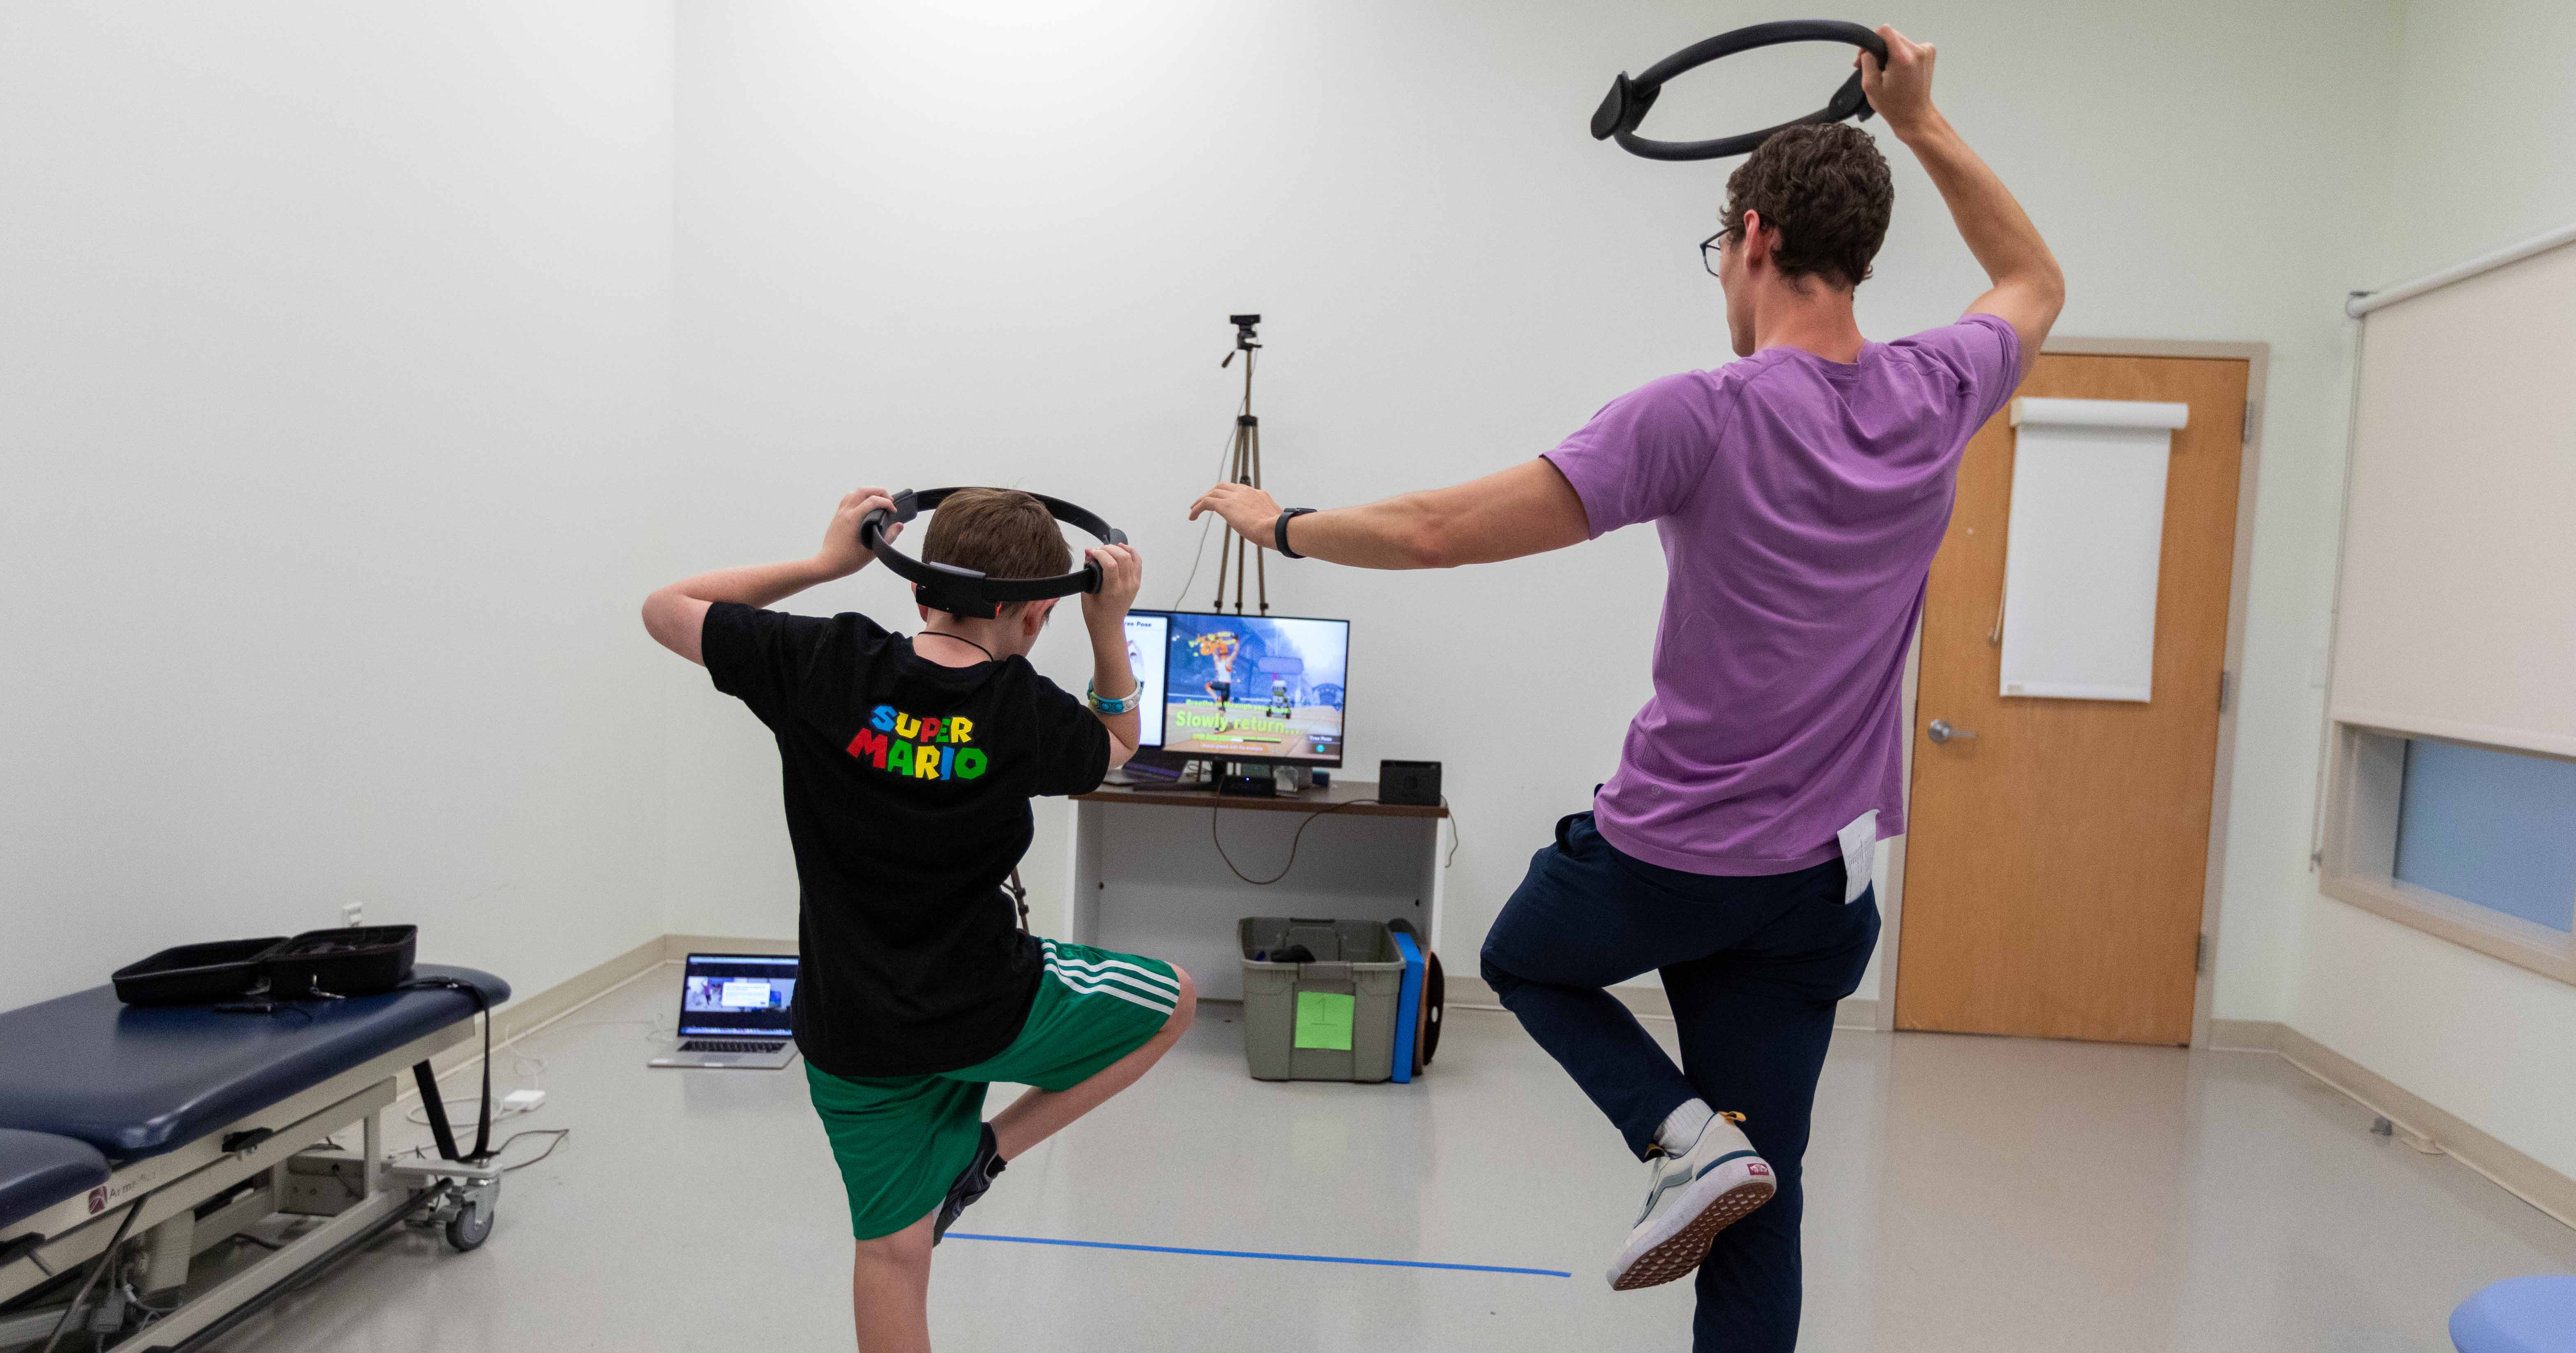 A 10-year-old boy with autism and Jacob Corey (right), a research assistant obtaining his doctorate in biomechanics and movement science, play with Ring Fit. In this photo, their backs are turned to the camera, while they watch a video game screen, and each hold a ring over their heads while standing on one leg. They're testing Ring Fit as a gross motor intervention for children with autism. 